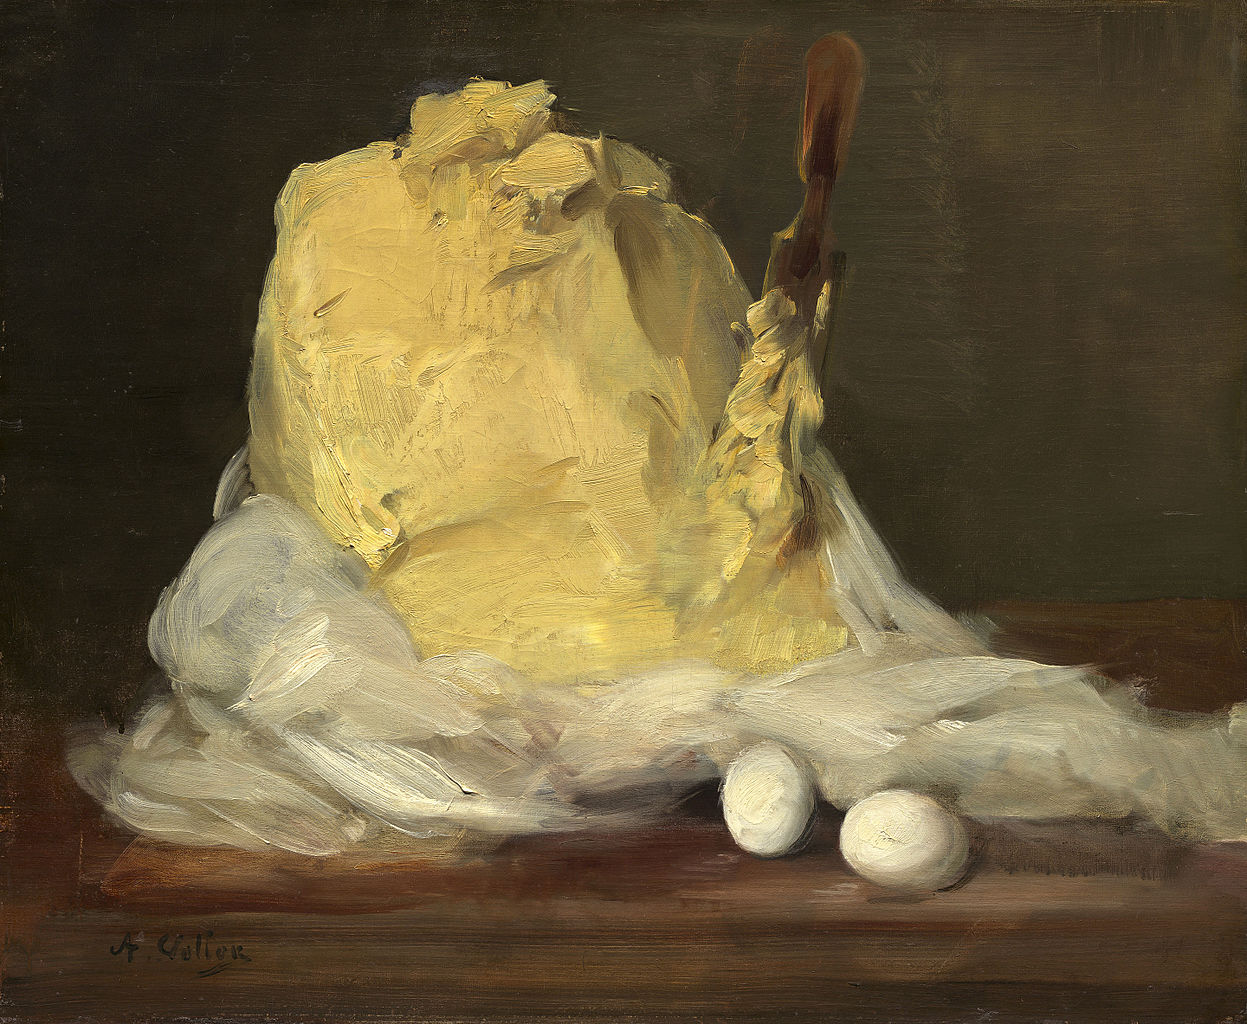 Mound of Butter by Antoine Vollon, 1870s. Wikipedia.
